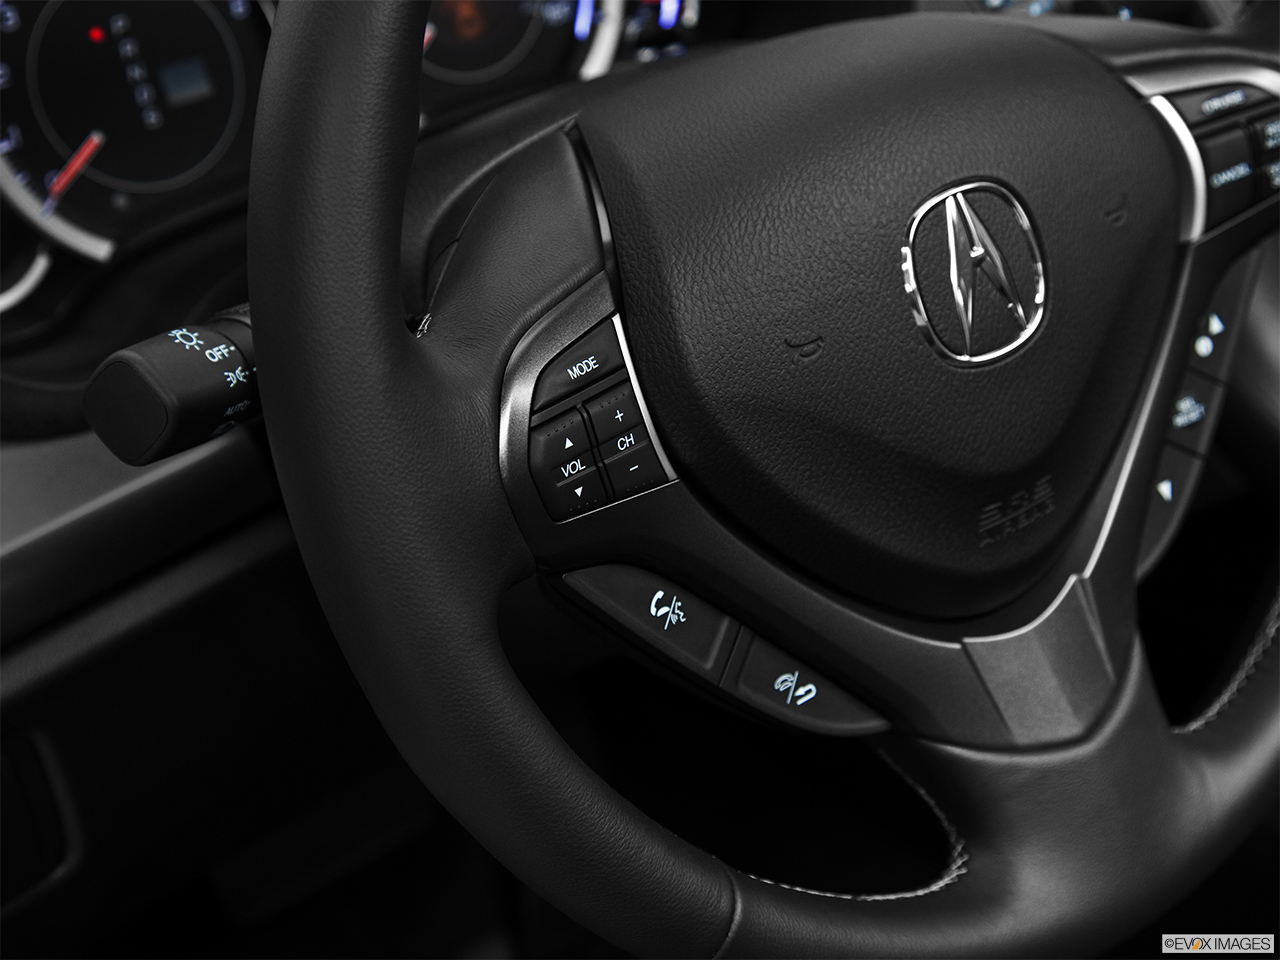 2011 Acura TSX TSX 5-speed Automatic Steering Wheel Controls (Left Side) 